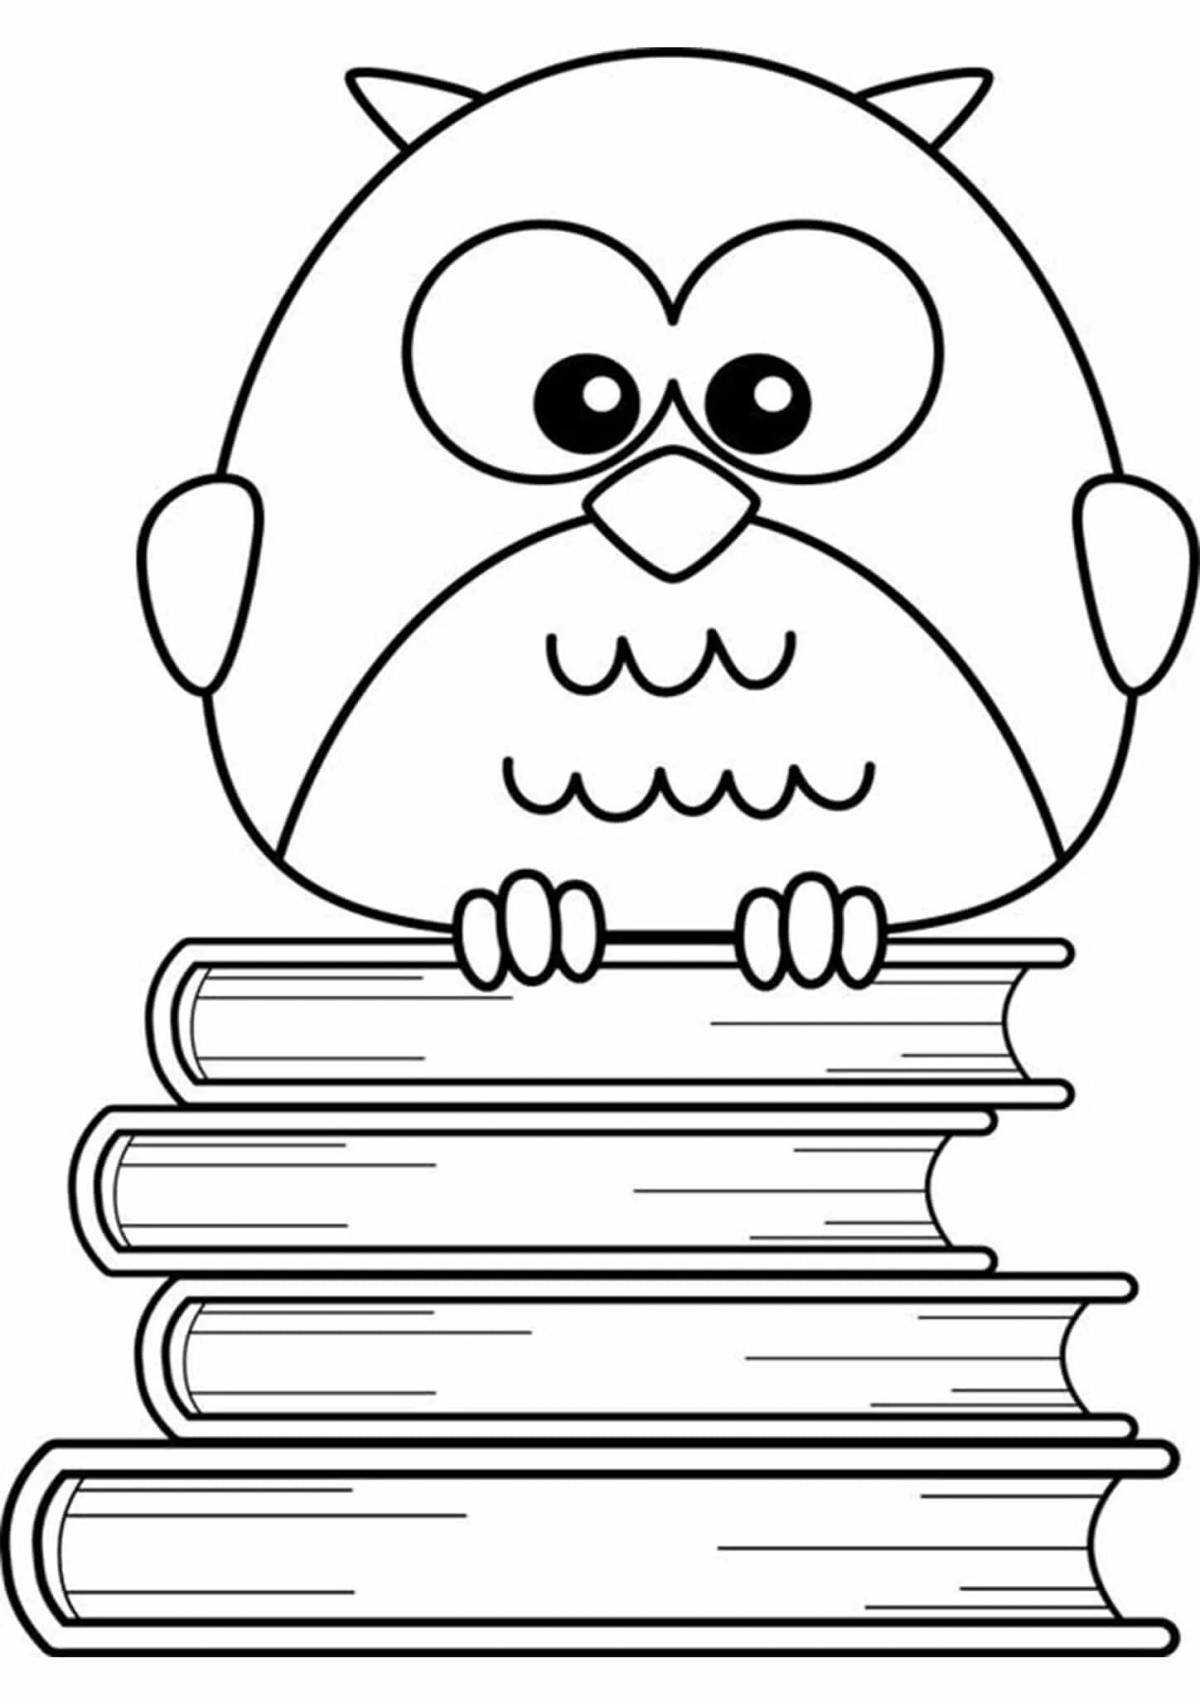 Joyful wise owl coloring book for kids